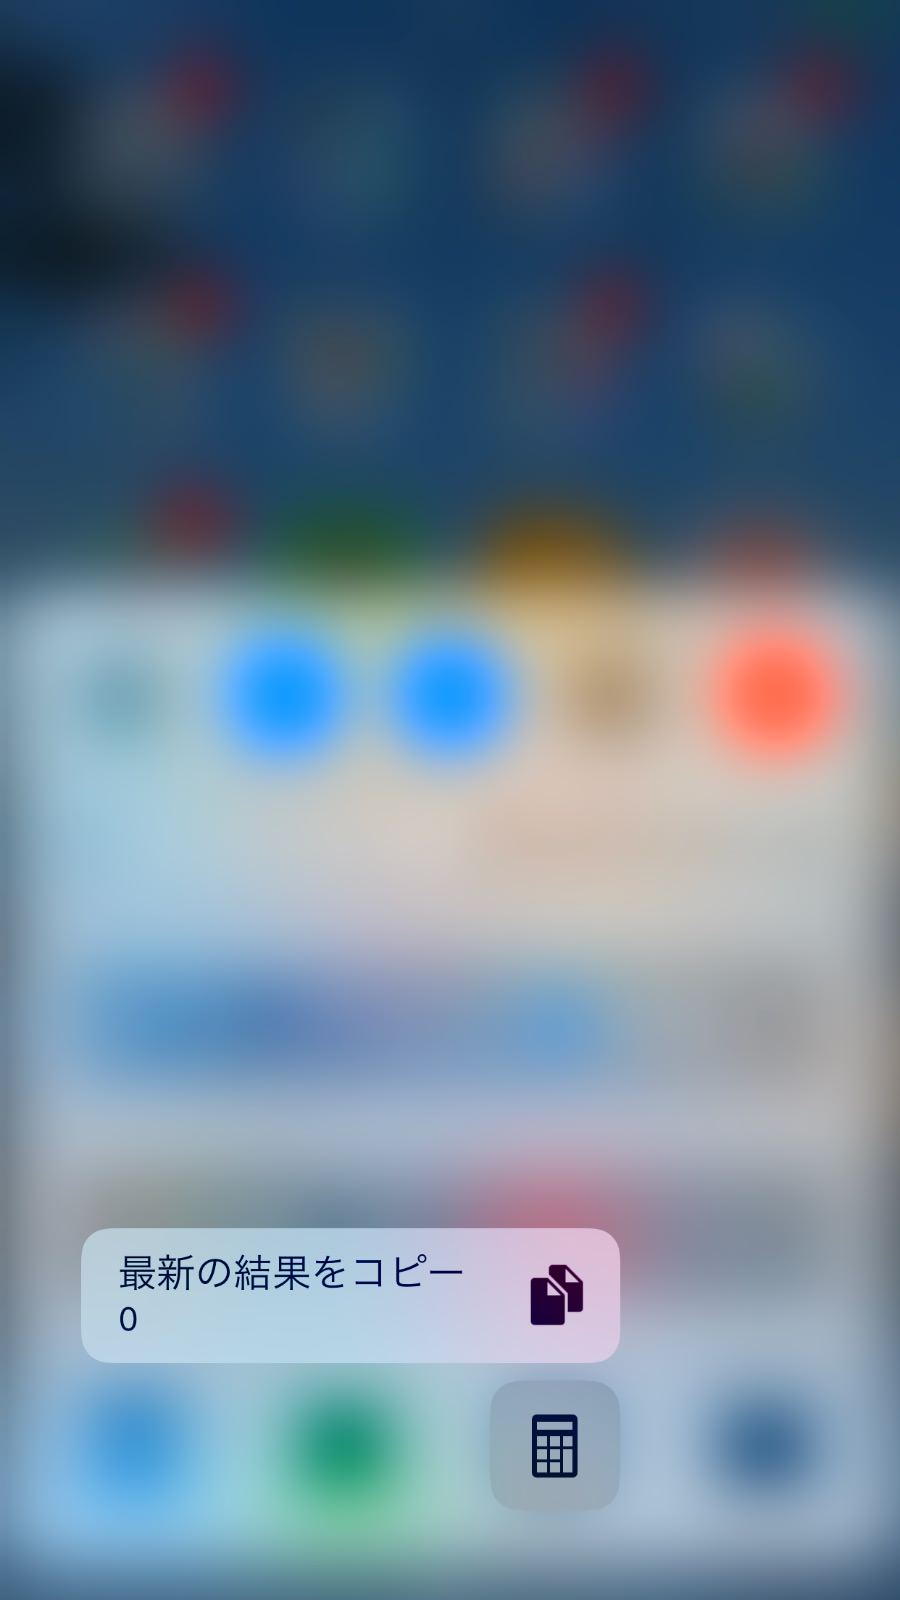 3dtouch control center 5315